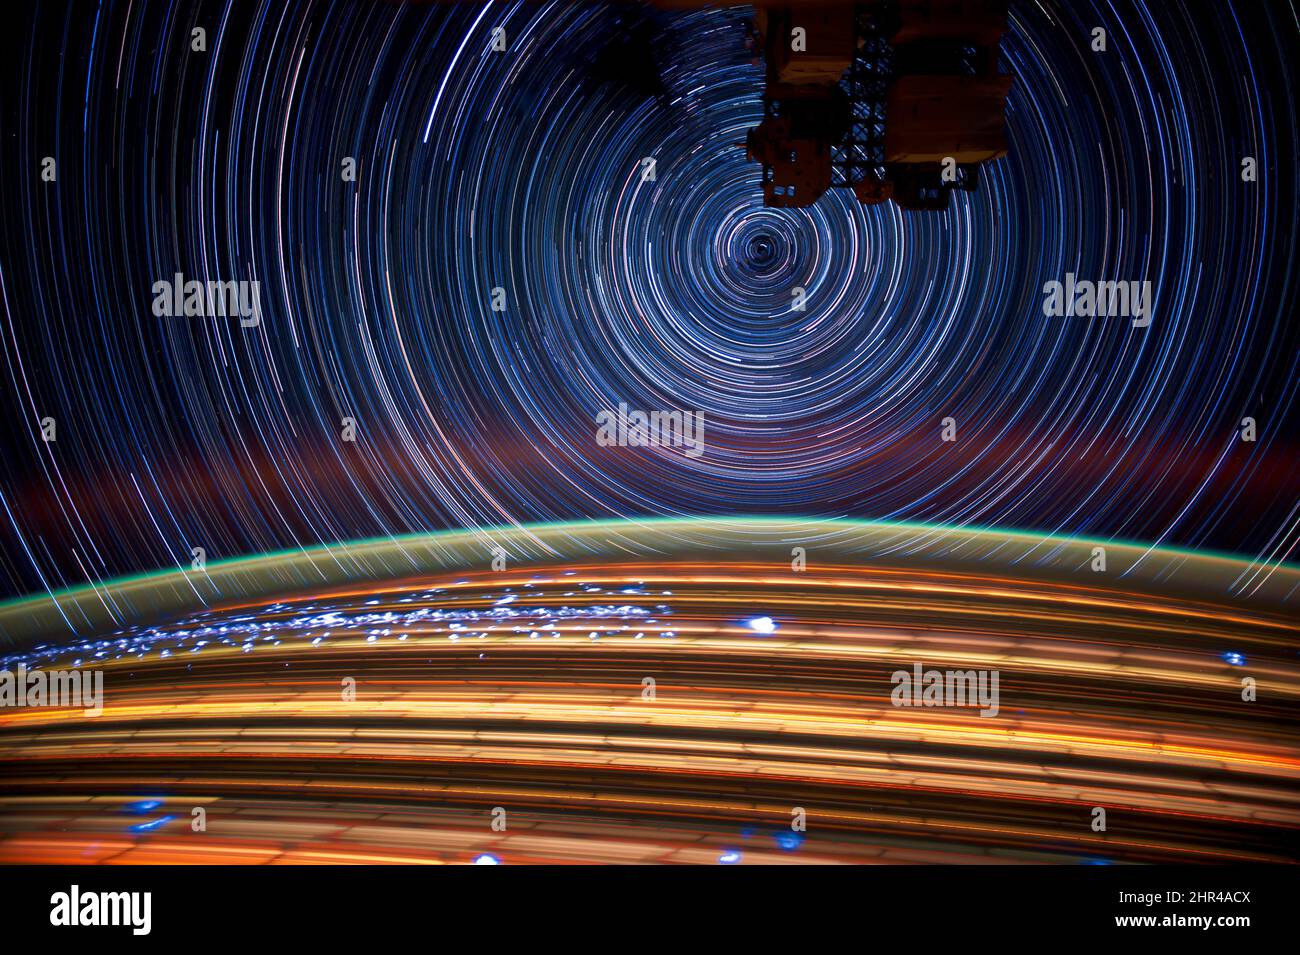 Earth horizon glows, Stars in motion background, long-exposure satellite photos from space, colorful rings. Elements of this image furnished by NASA. Stock Photo